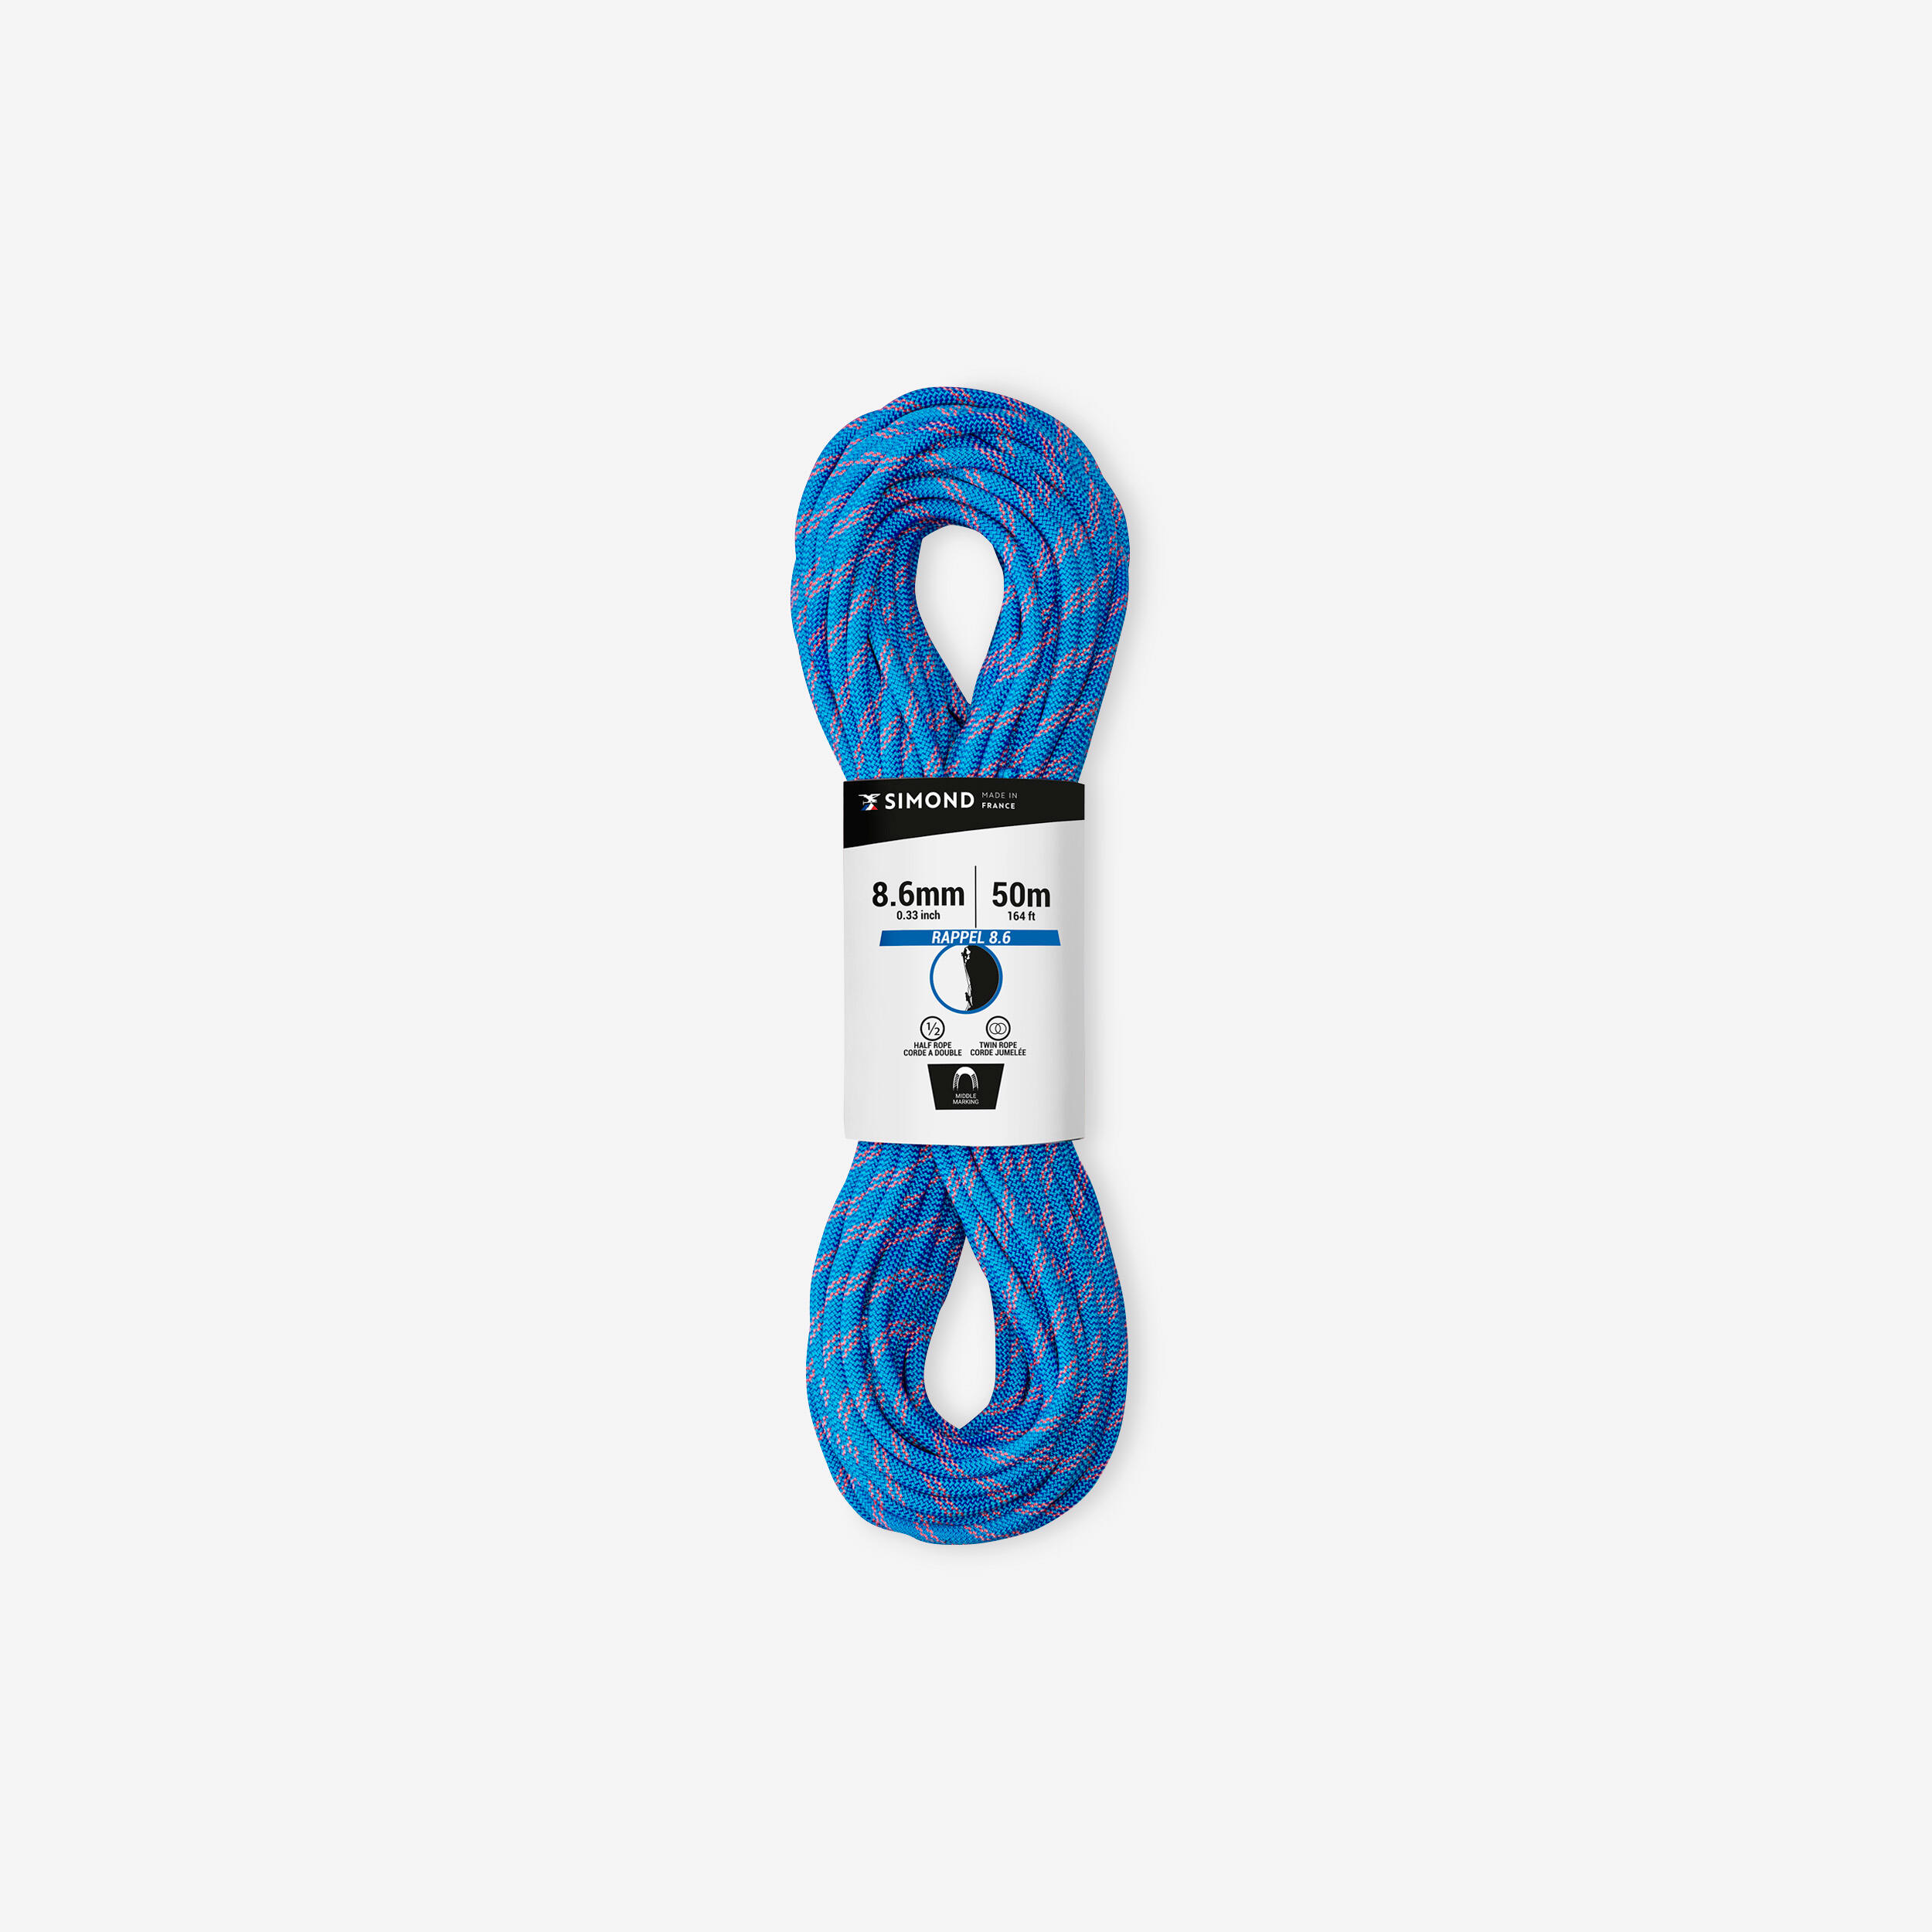 SIMOND Climbing and mountaineering half rope 8.6 mm x 50 m - RAPPEL 8.6 Blue